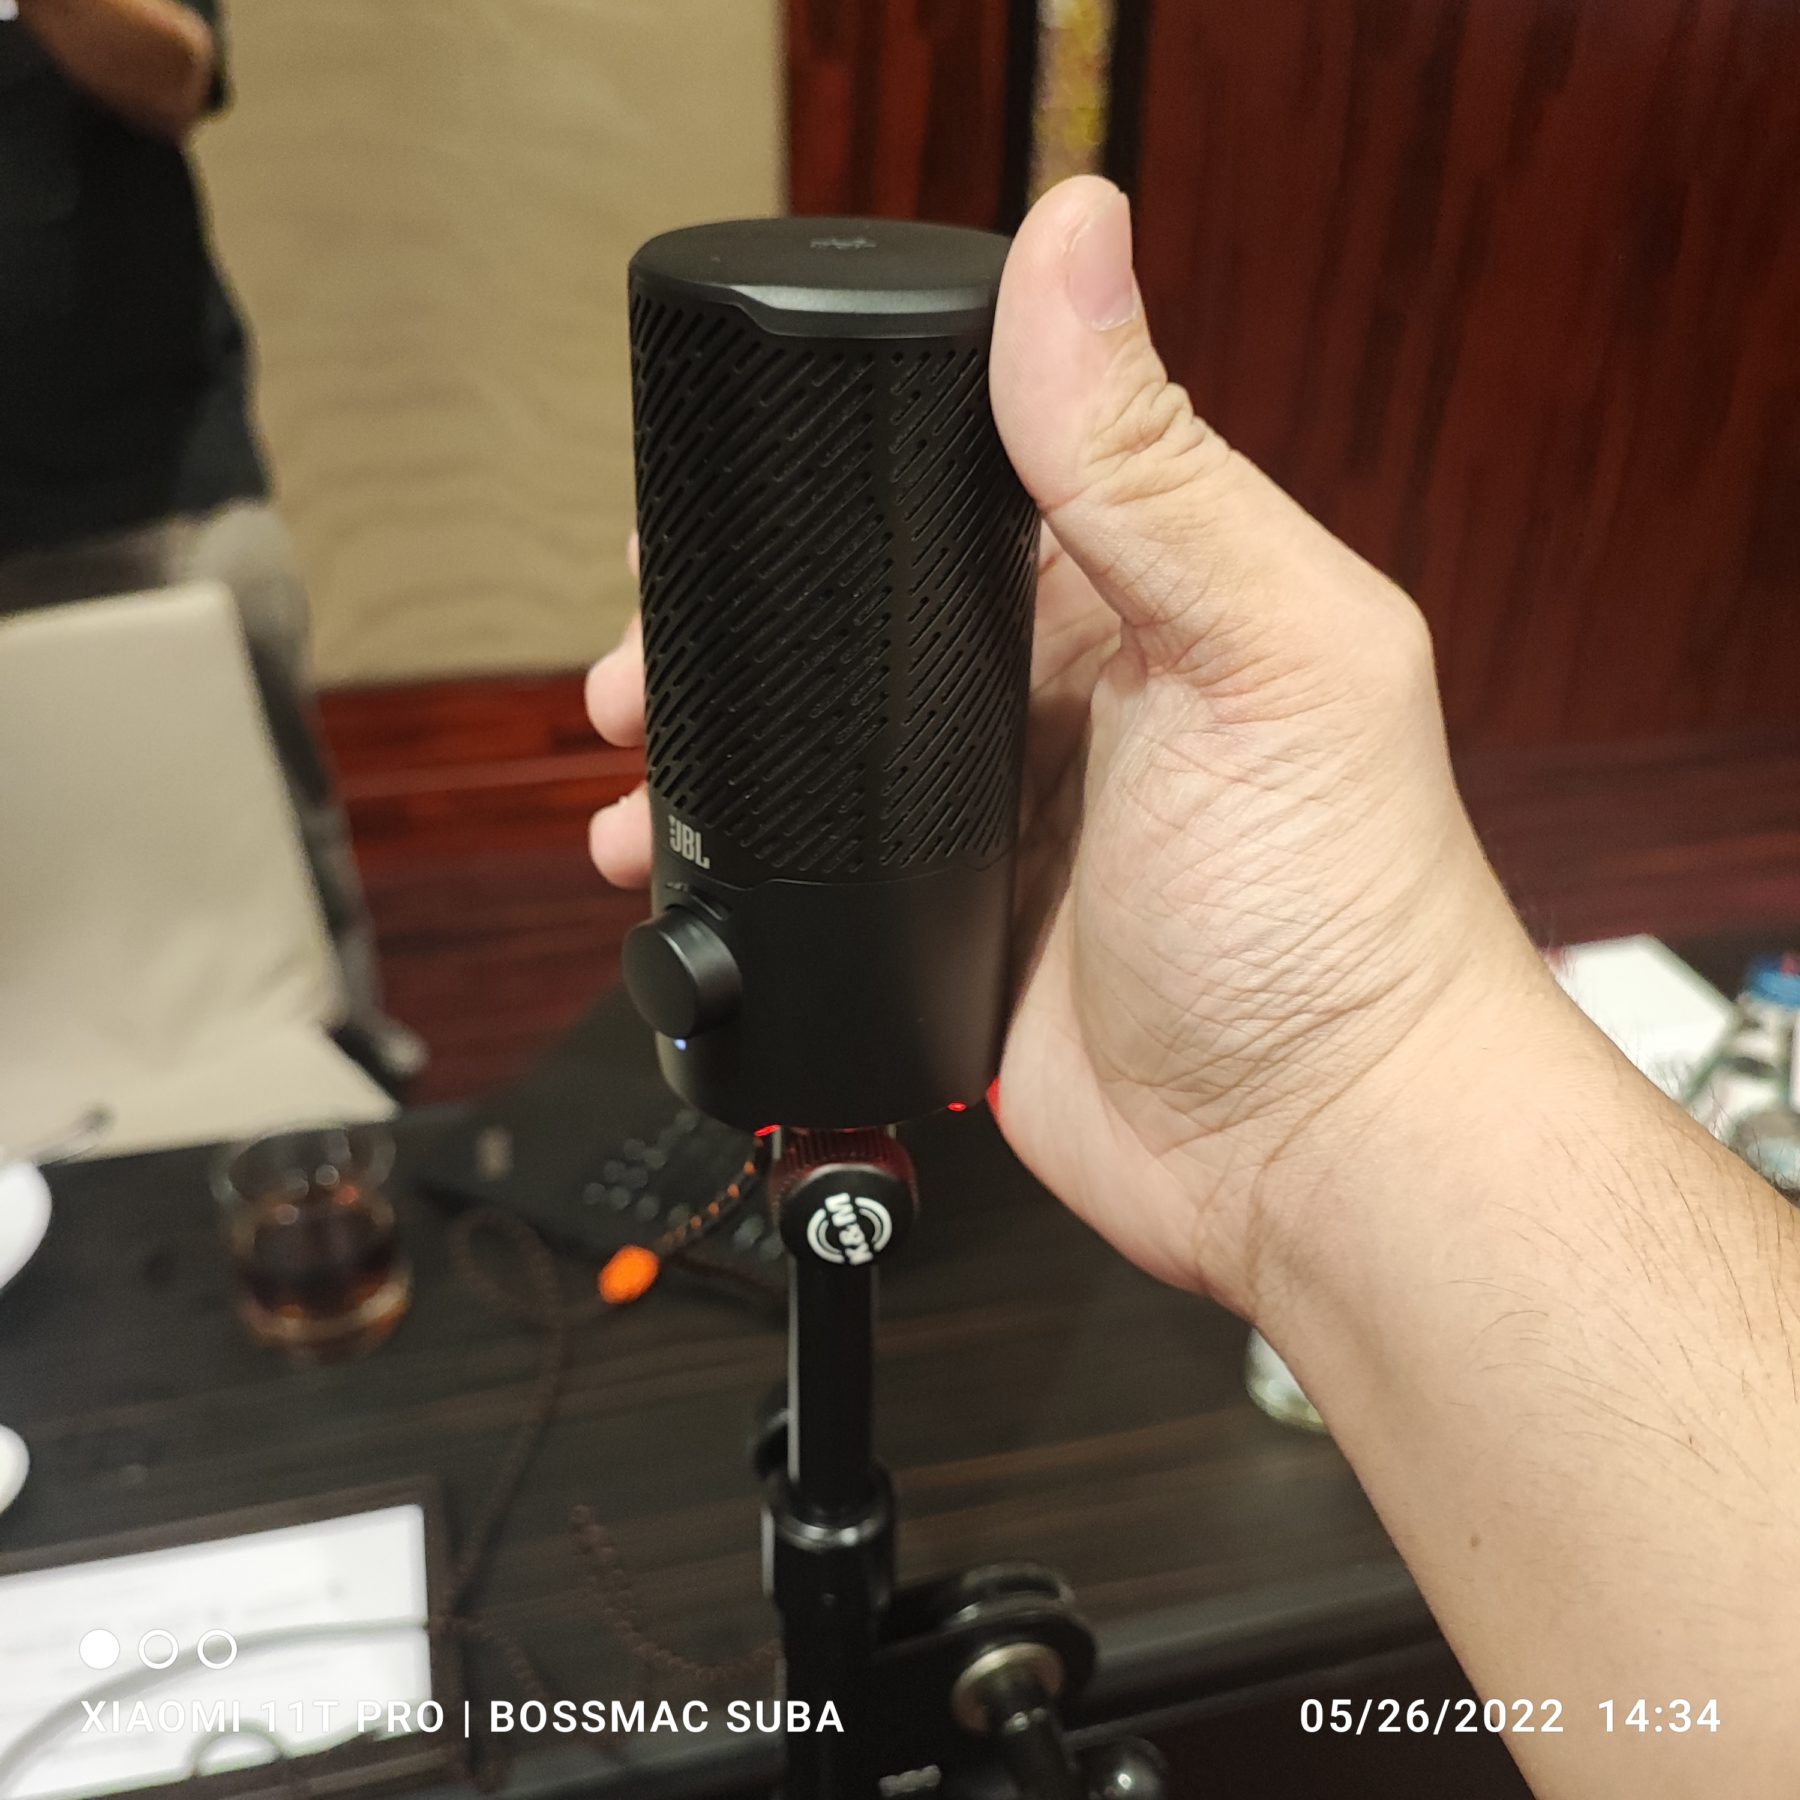 JBL Philippines Showcases New TWS Ear Buds with ANC, New PartyBox and New Streaming Mic - returnal